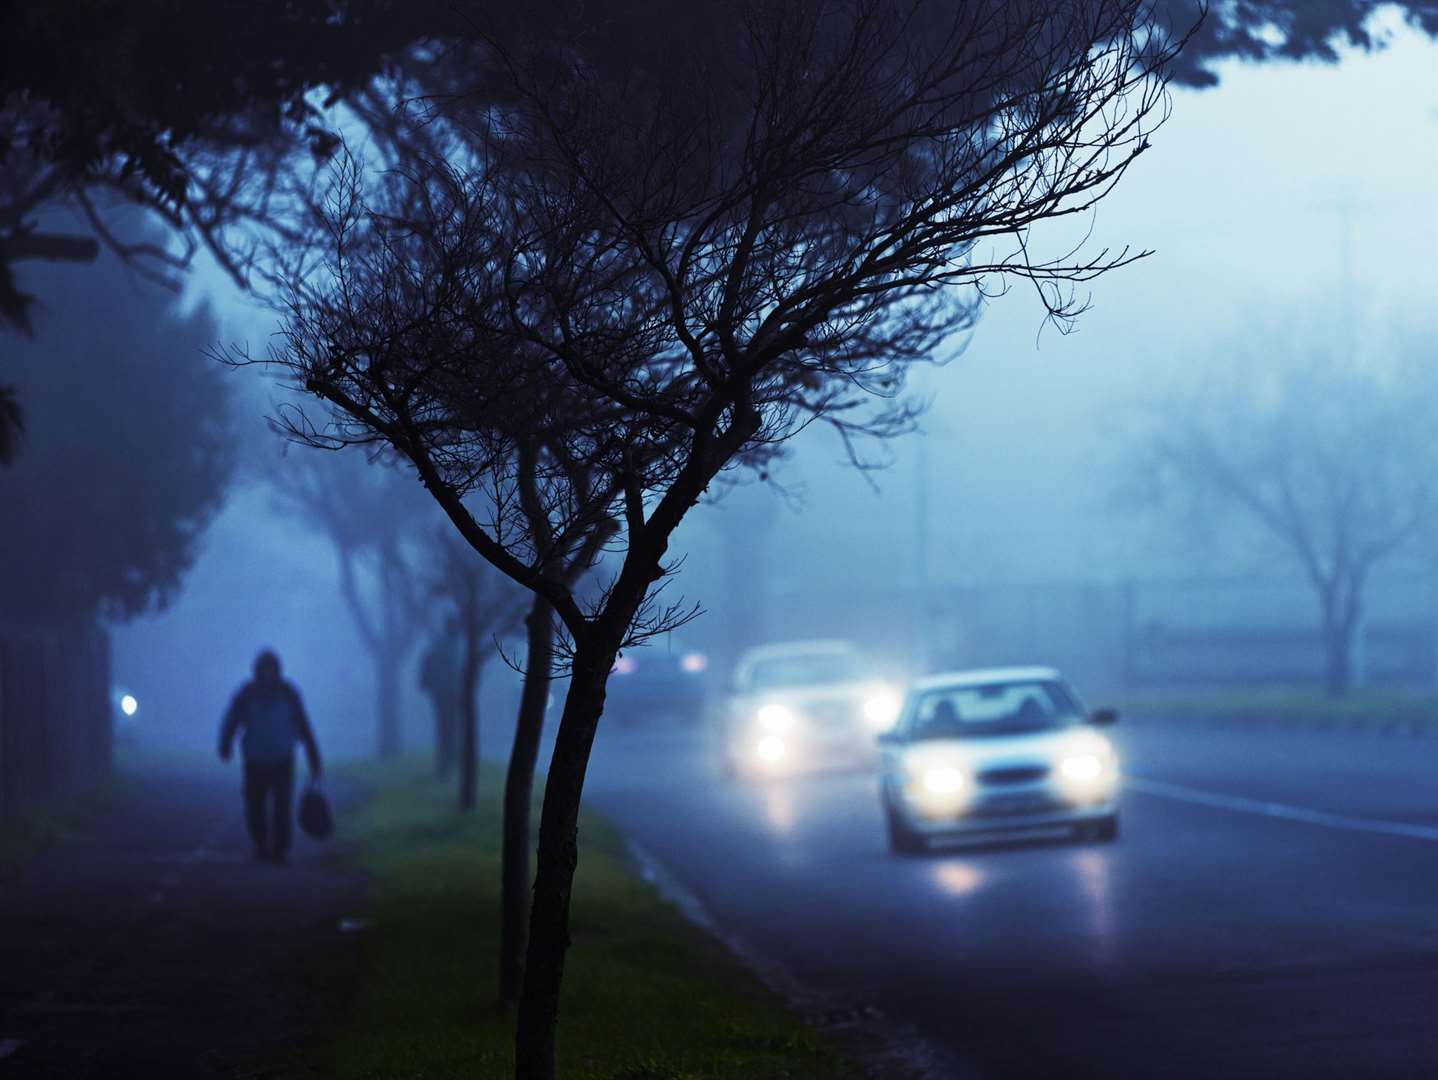 Darker mornings and nights can become a danger to pedestrians and cyclists